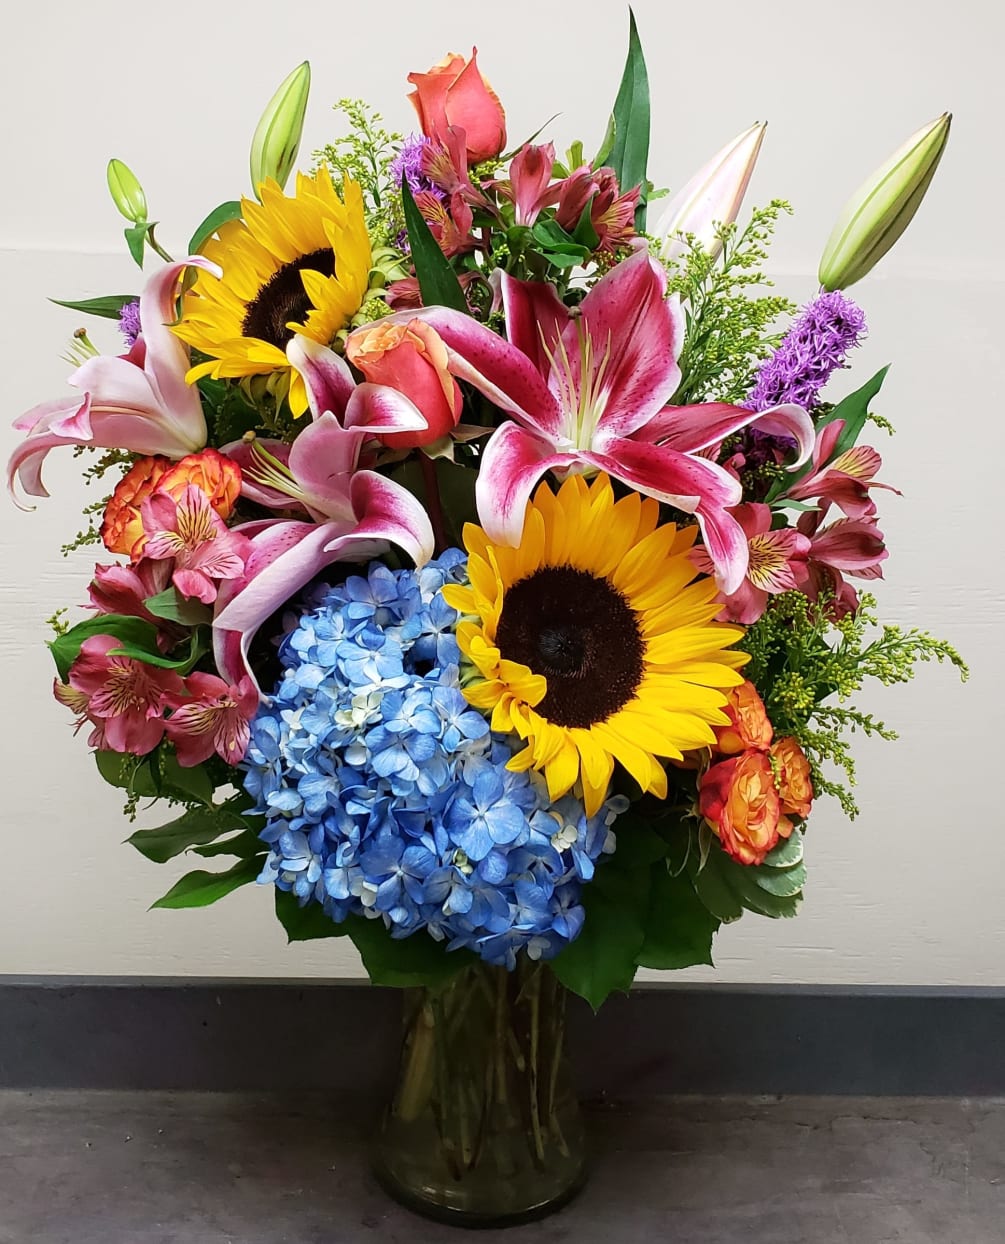 MATISSE ARRANGEMENT BY TWIN TOWERS FLORIST
Signature Classics Collection. Exclusive designs inspired by